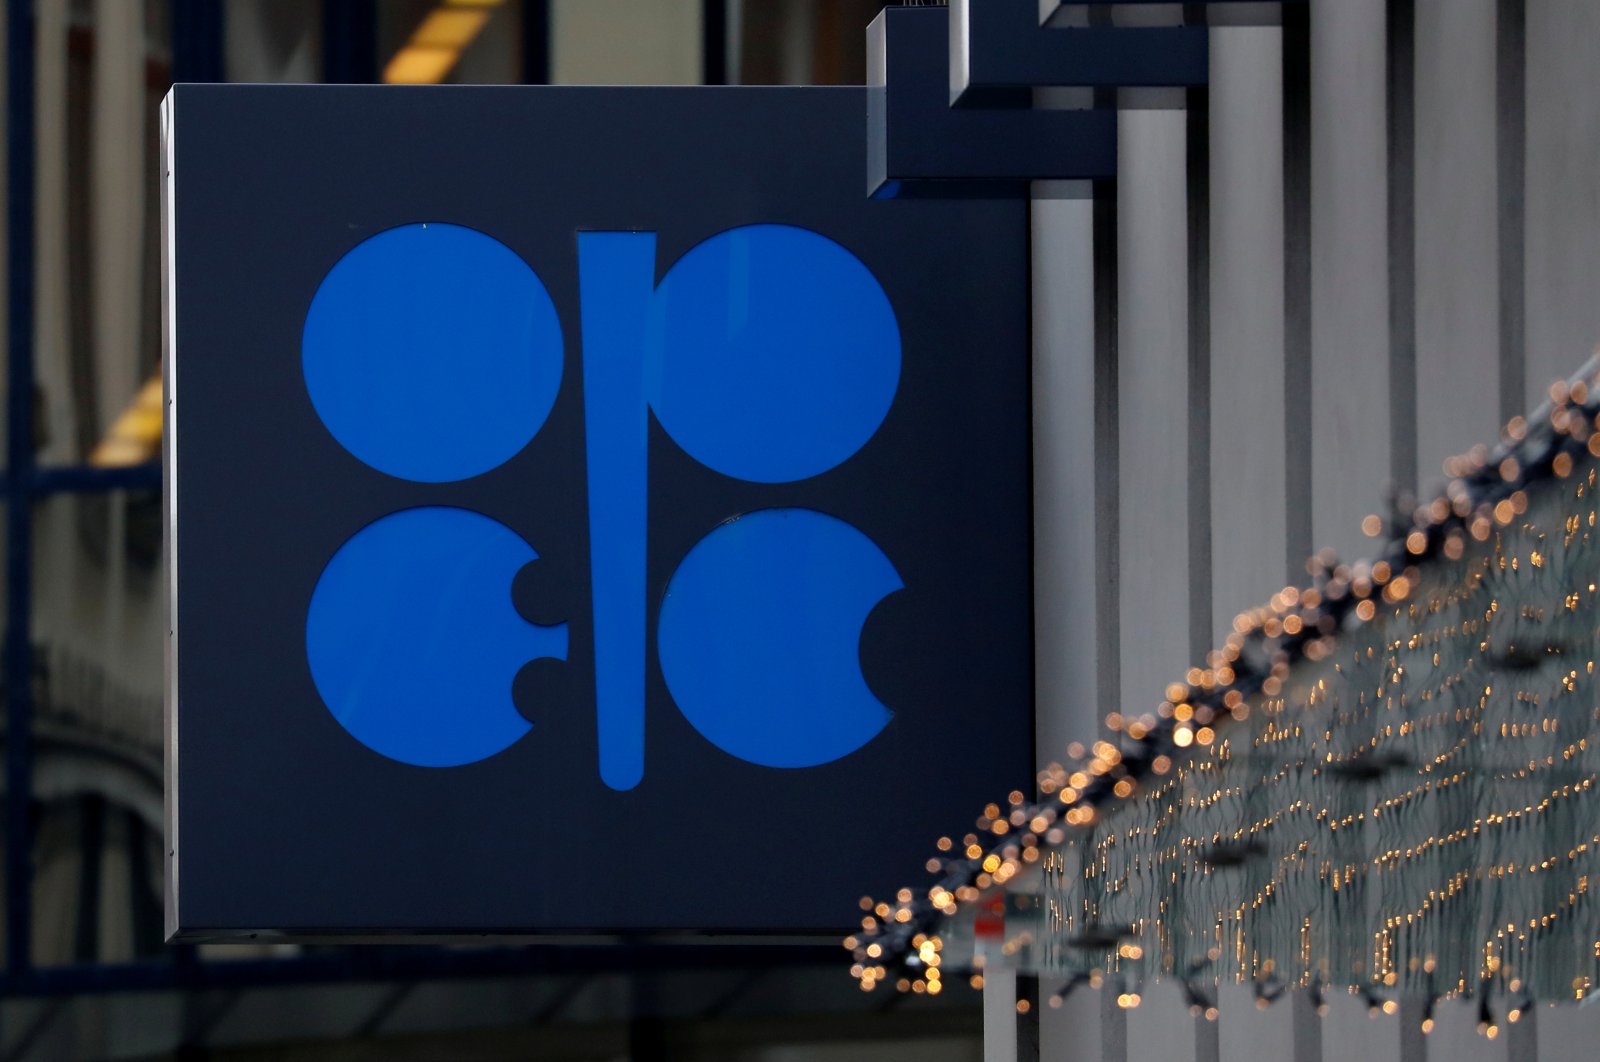 The logo of the Organisation of the Petroleum Exporting Countries (OPEC) sits outside its headquarters in Vienna, Austria, Dec. 6, 2019. (Reuters Photo)